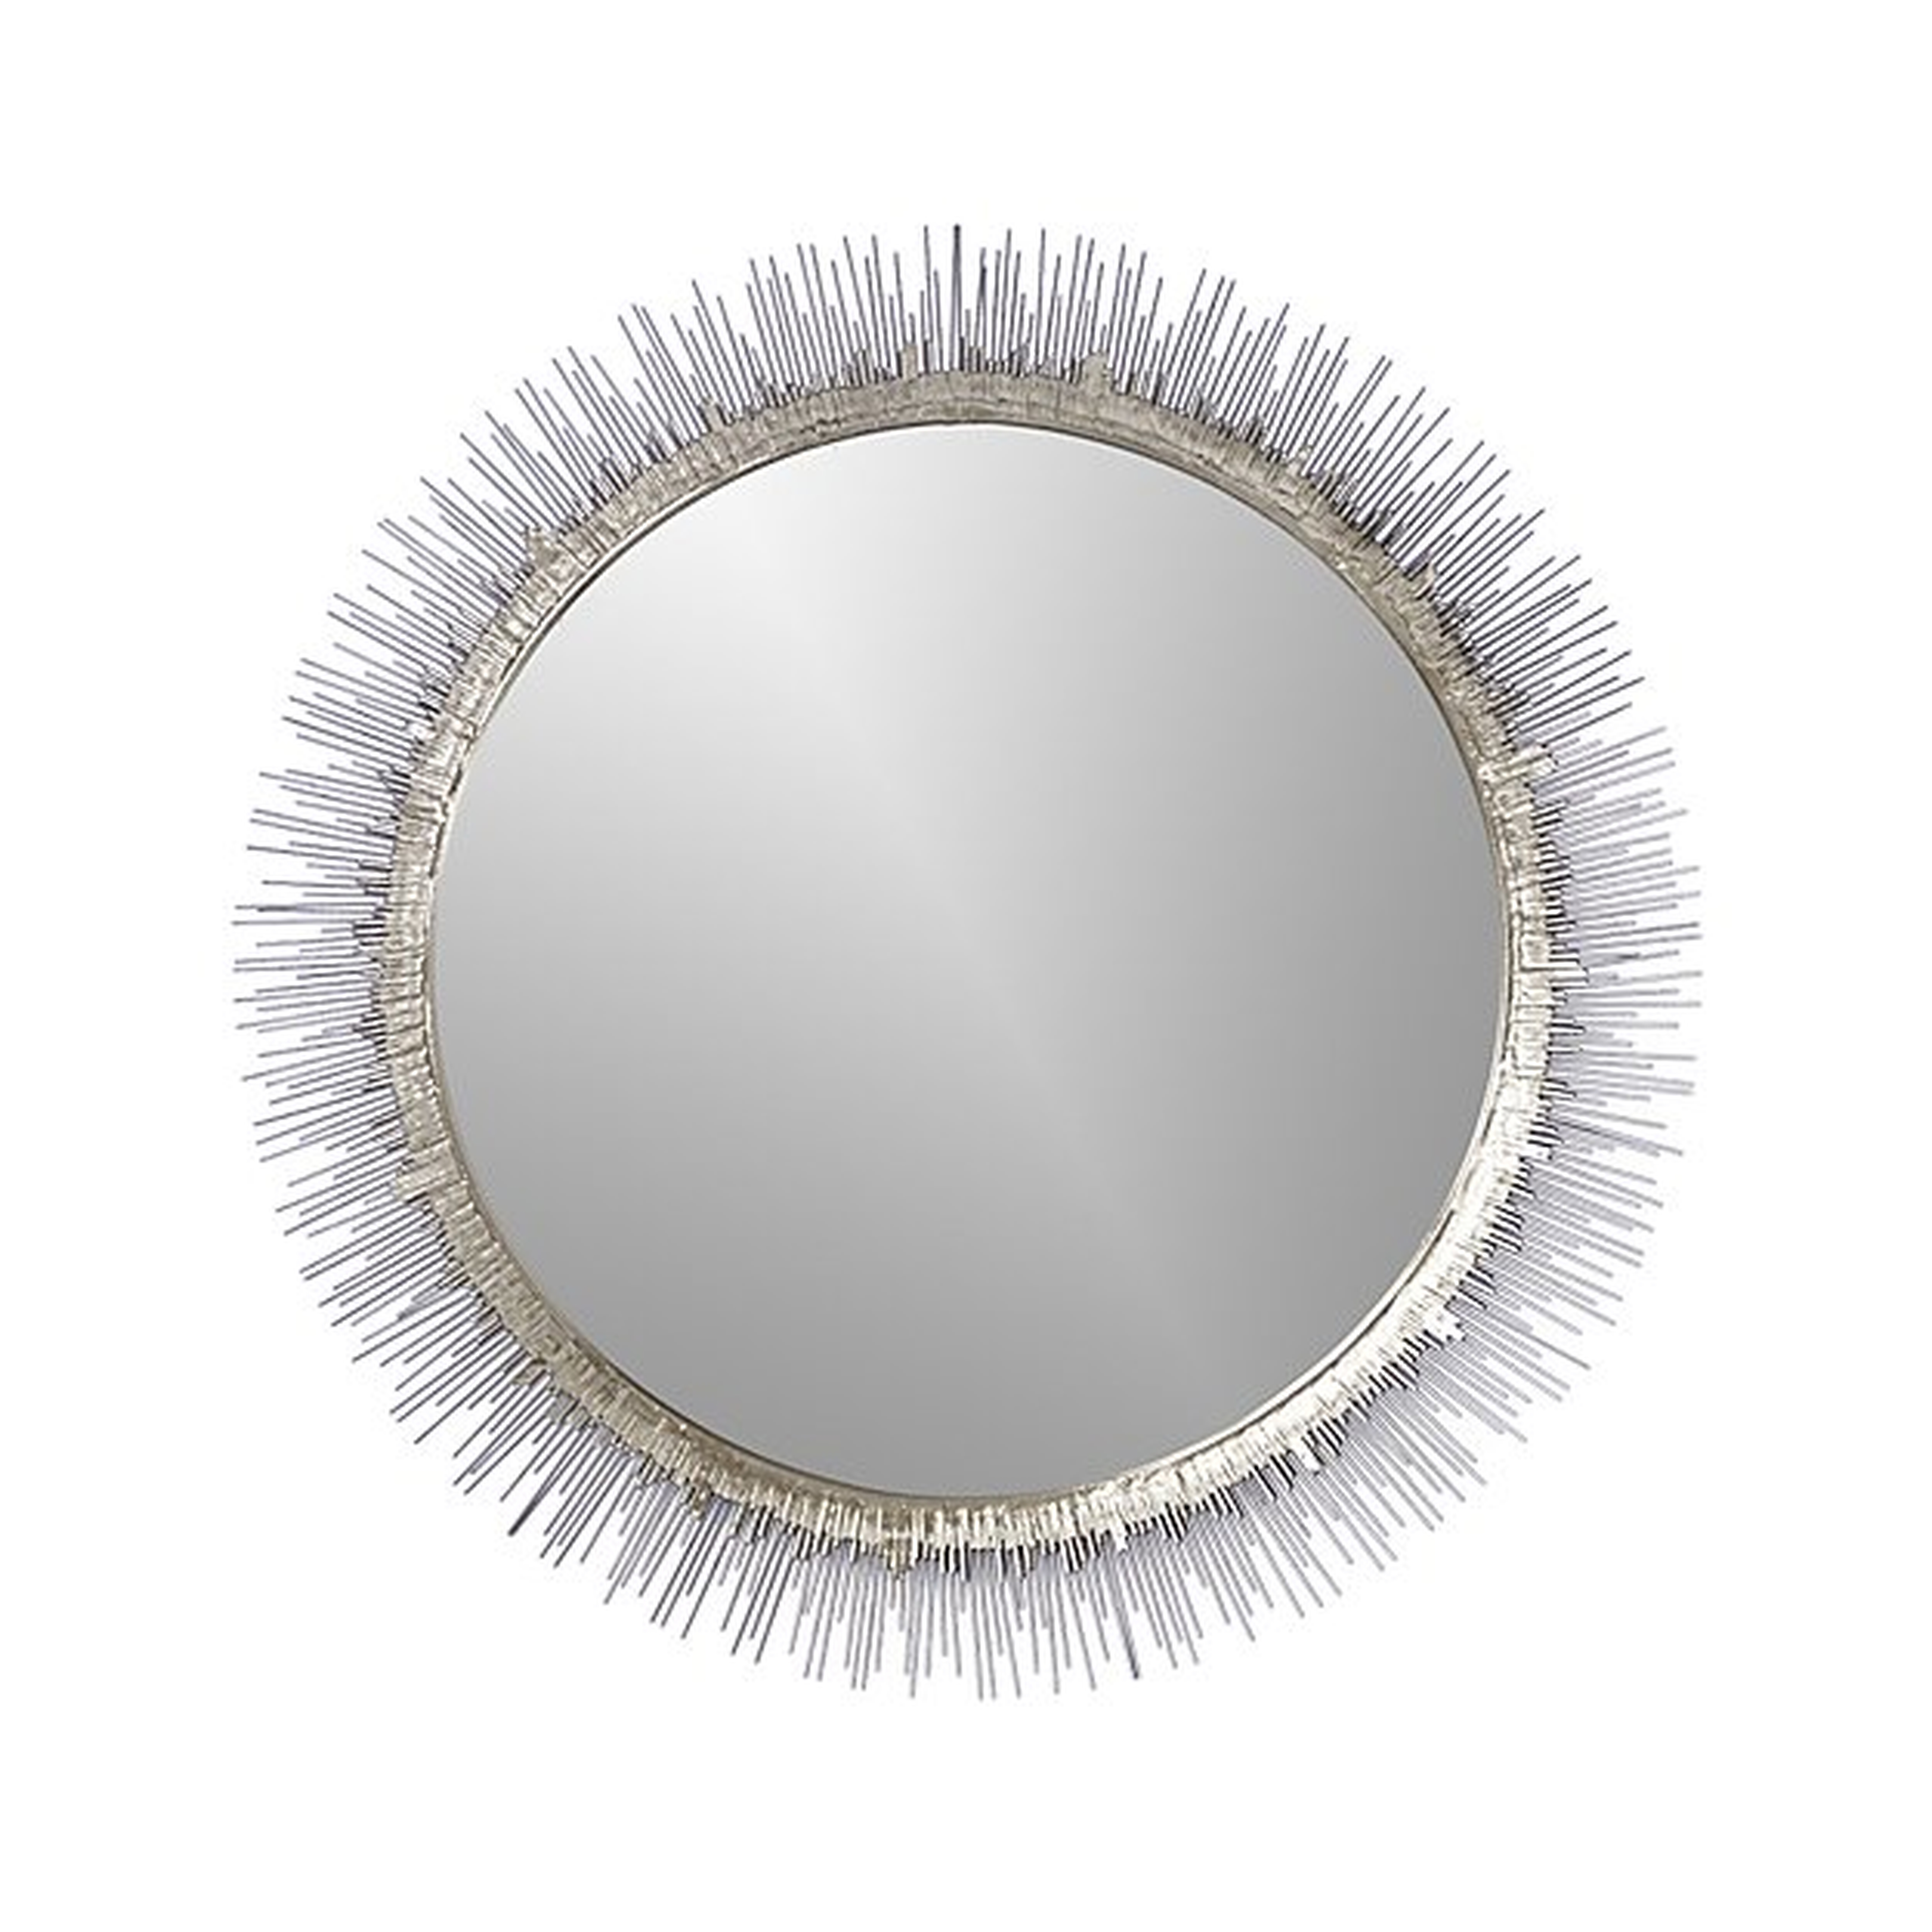 Clarendon Large Round Silver Wall Mirror - Crate and Barrel